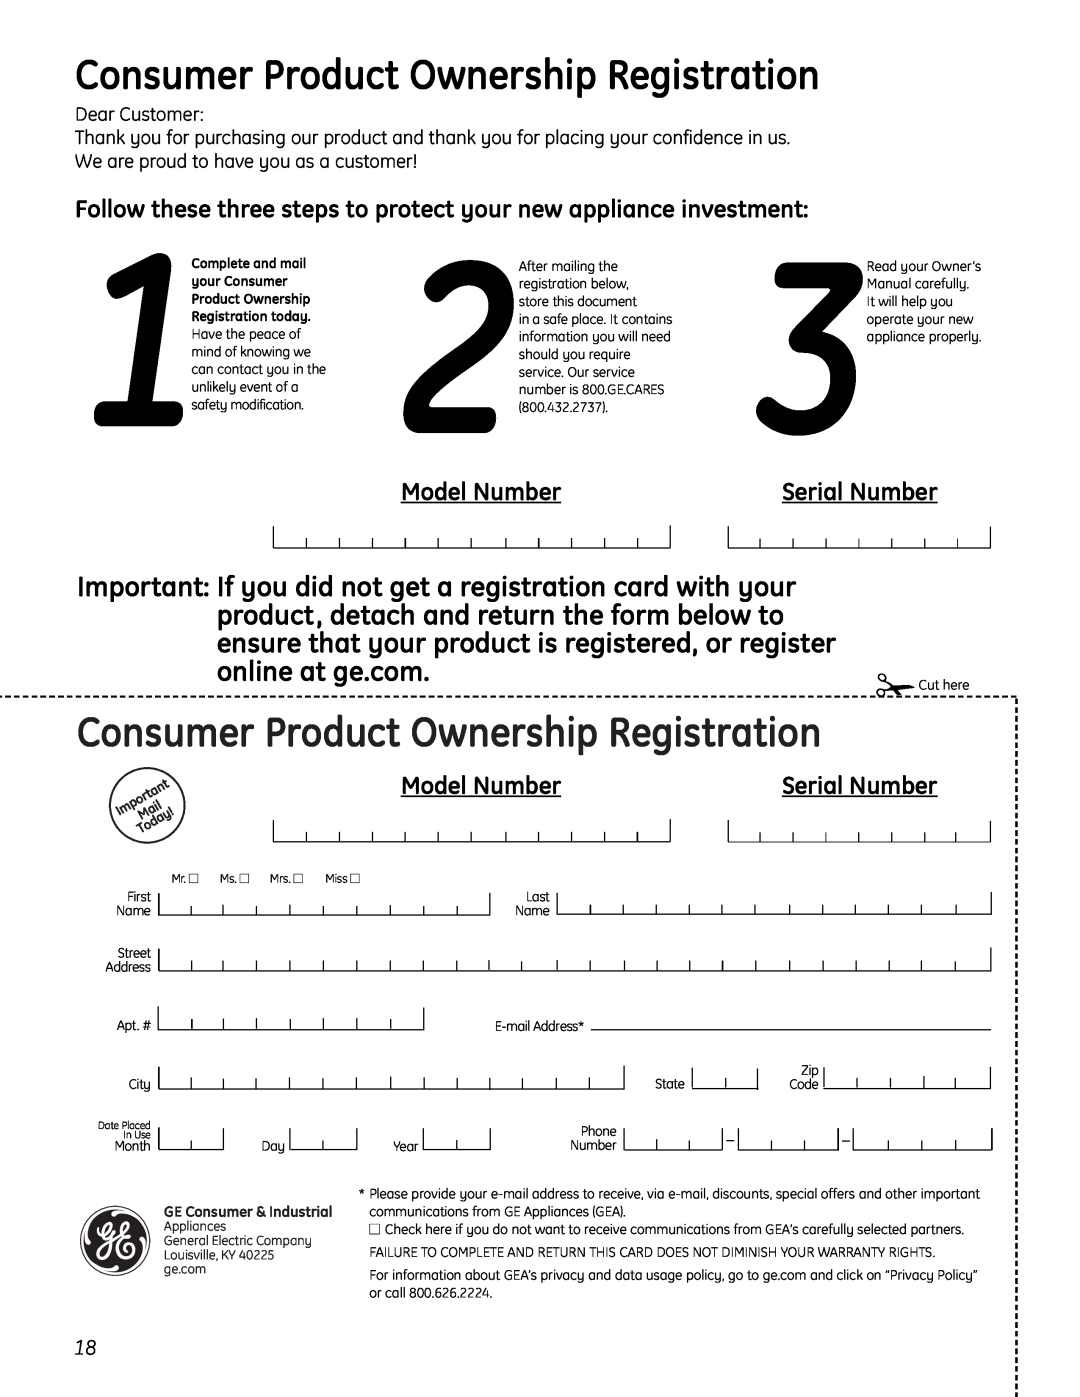 GE PCR06BATSS, PCR06WATSS Follow these three steps to protect your new appliance investment, Model Number, Serial Number 